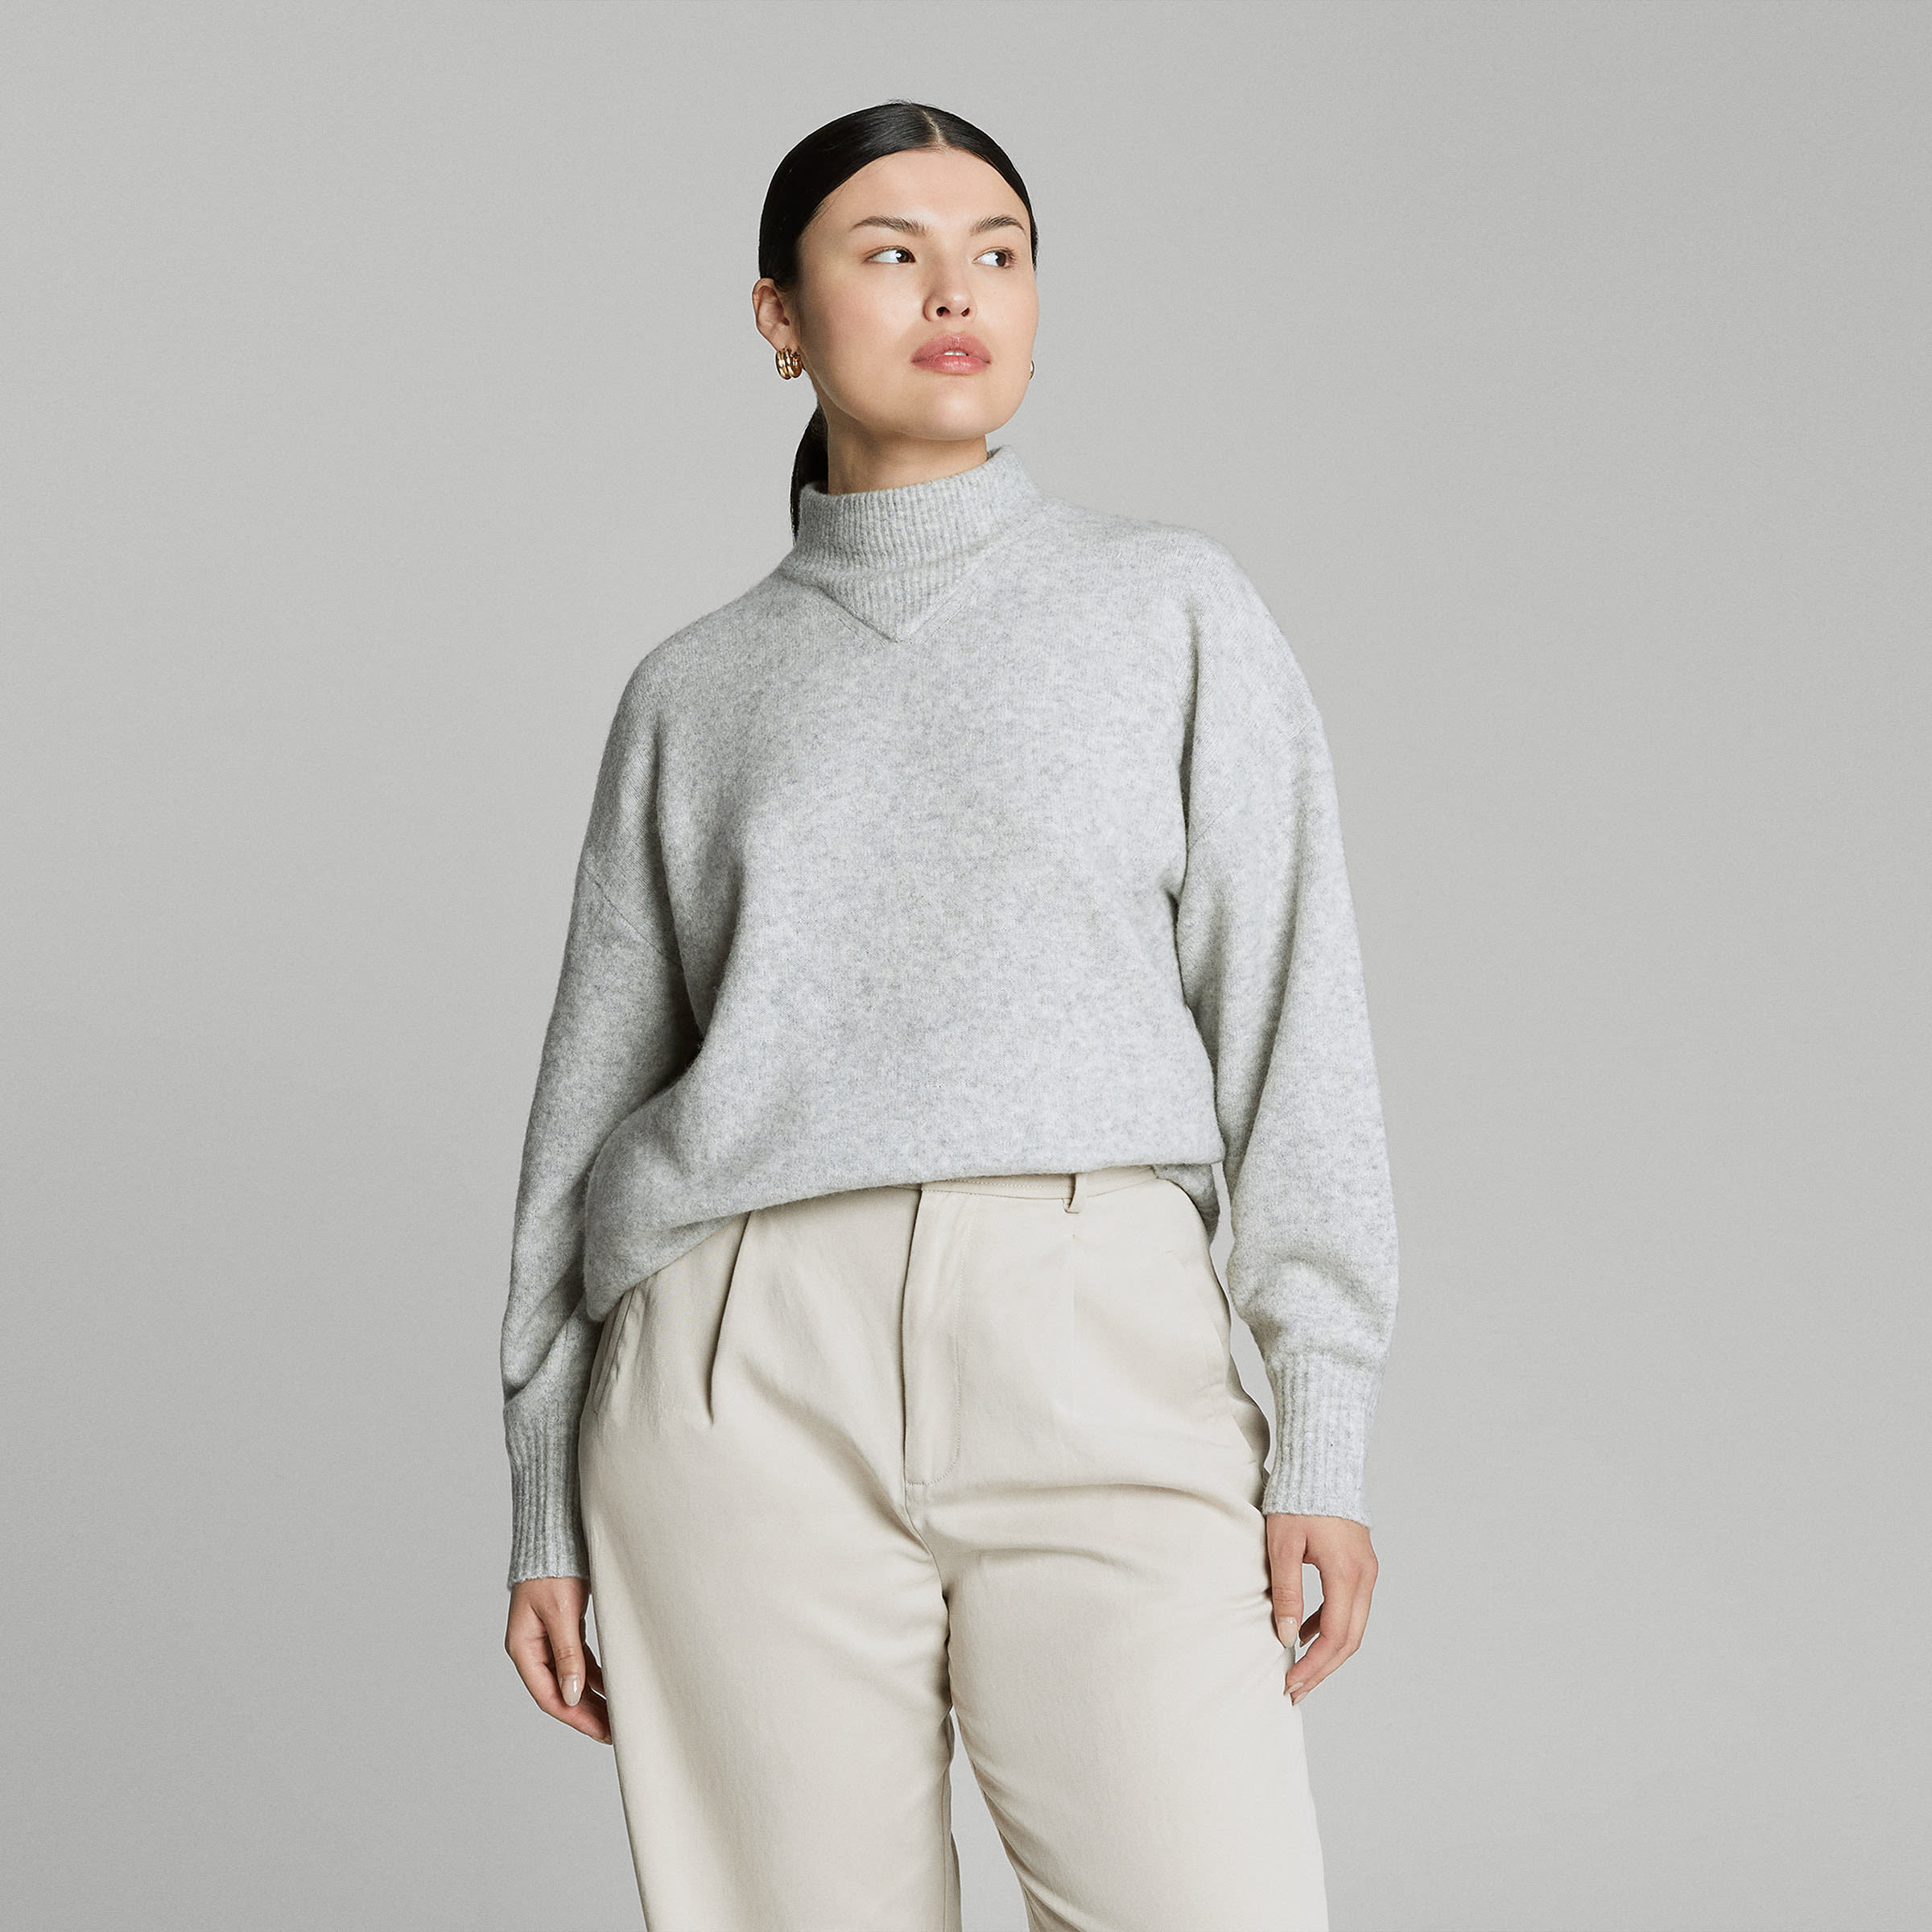 The Cozy-Stretch Pullover